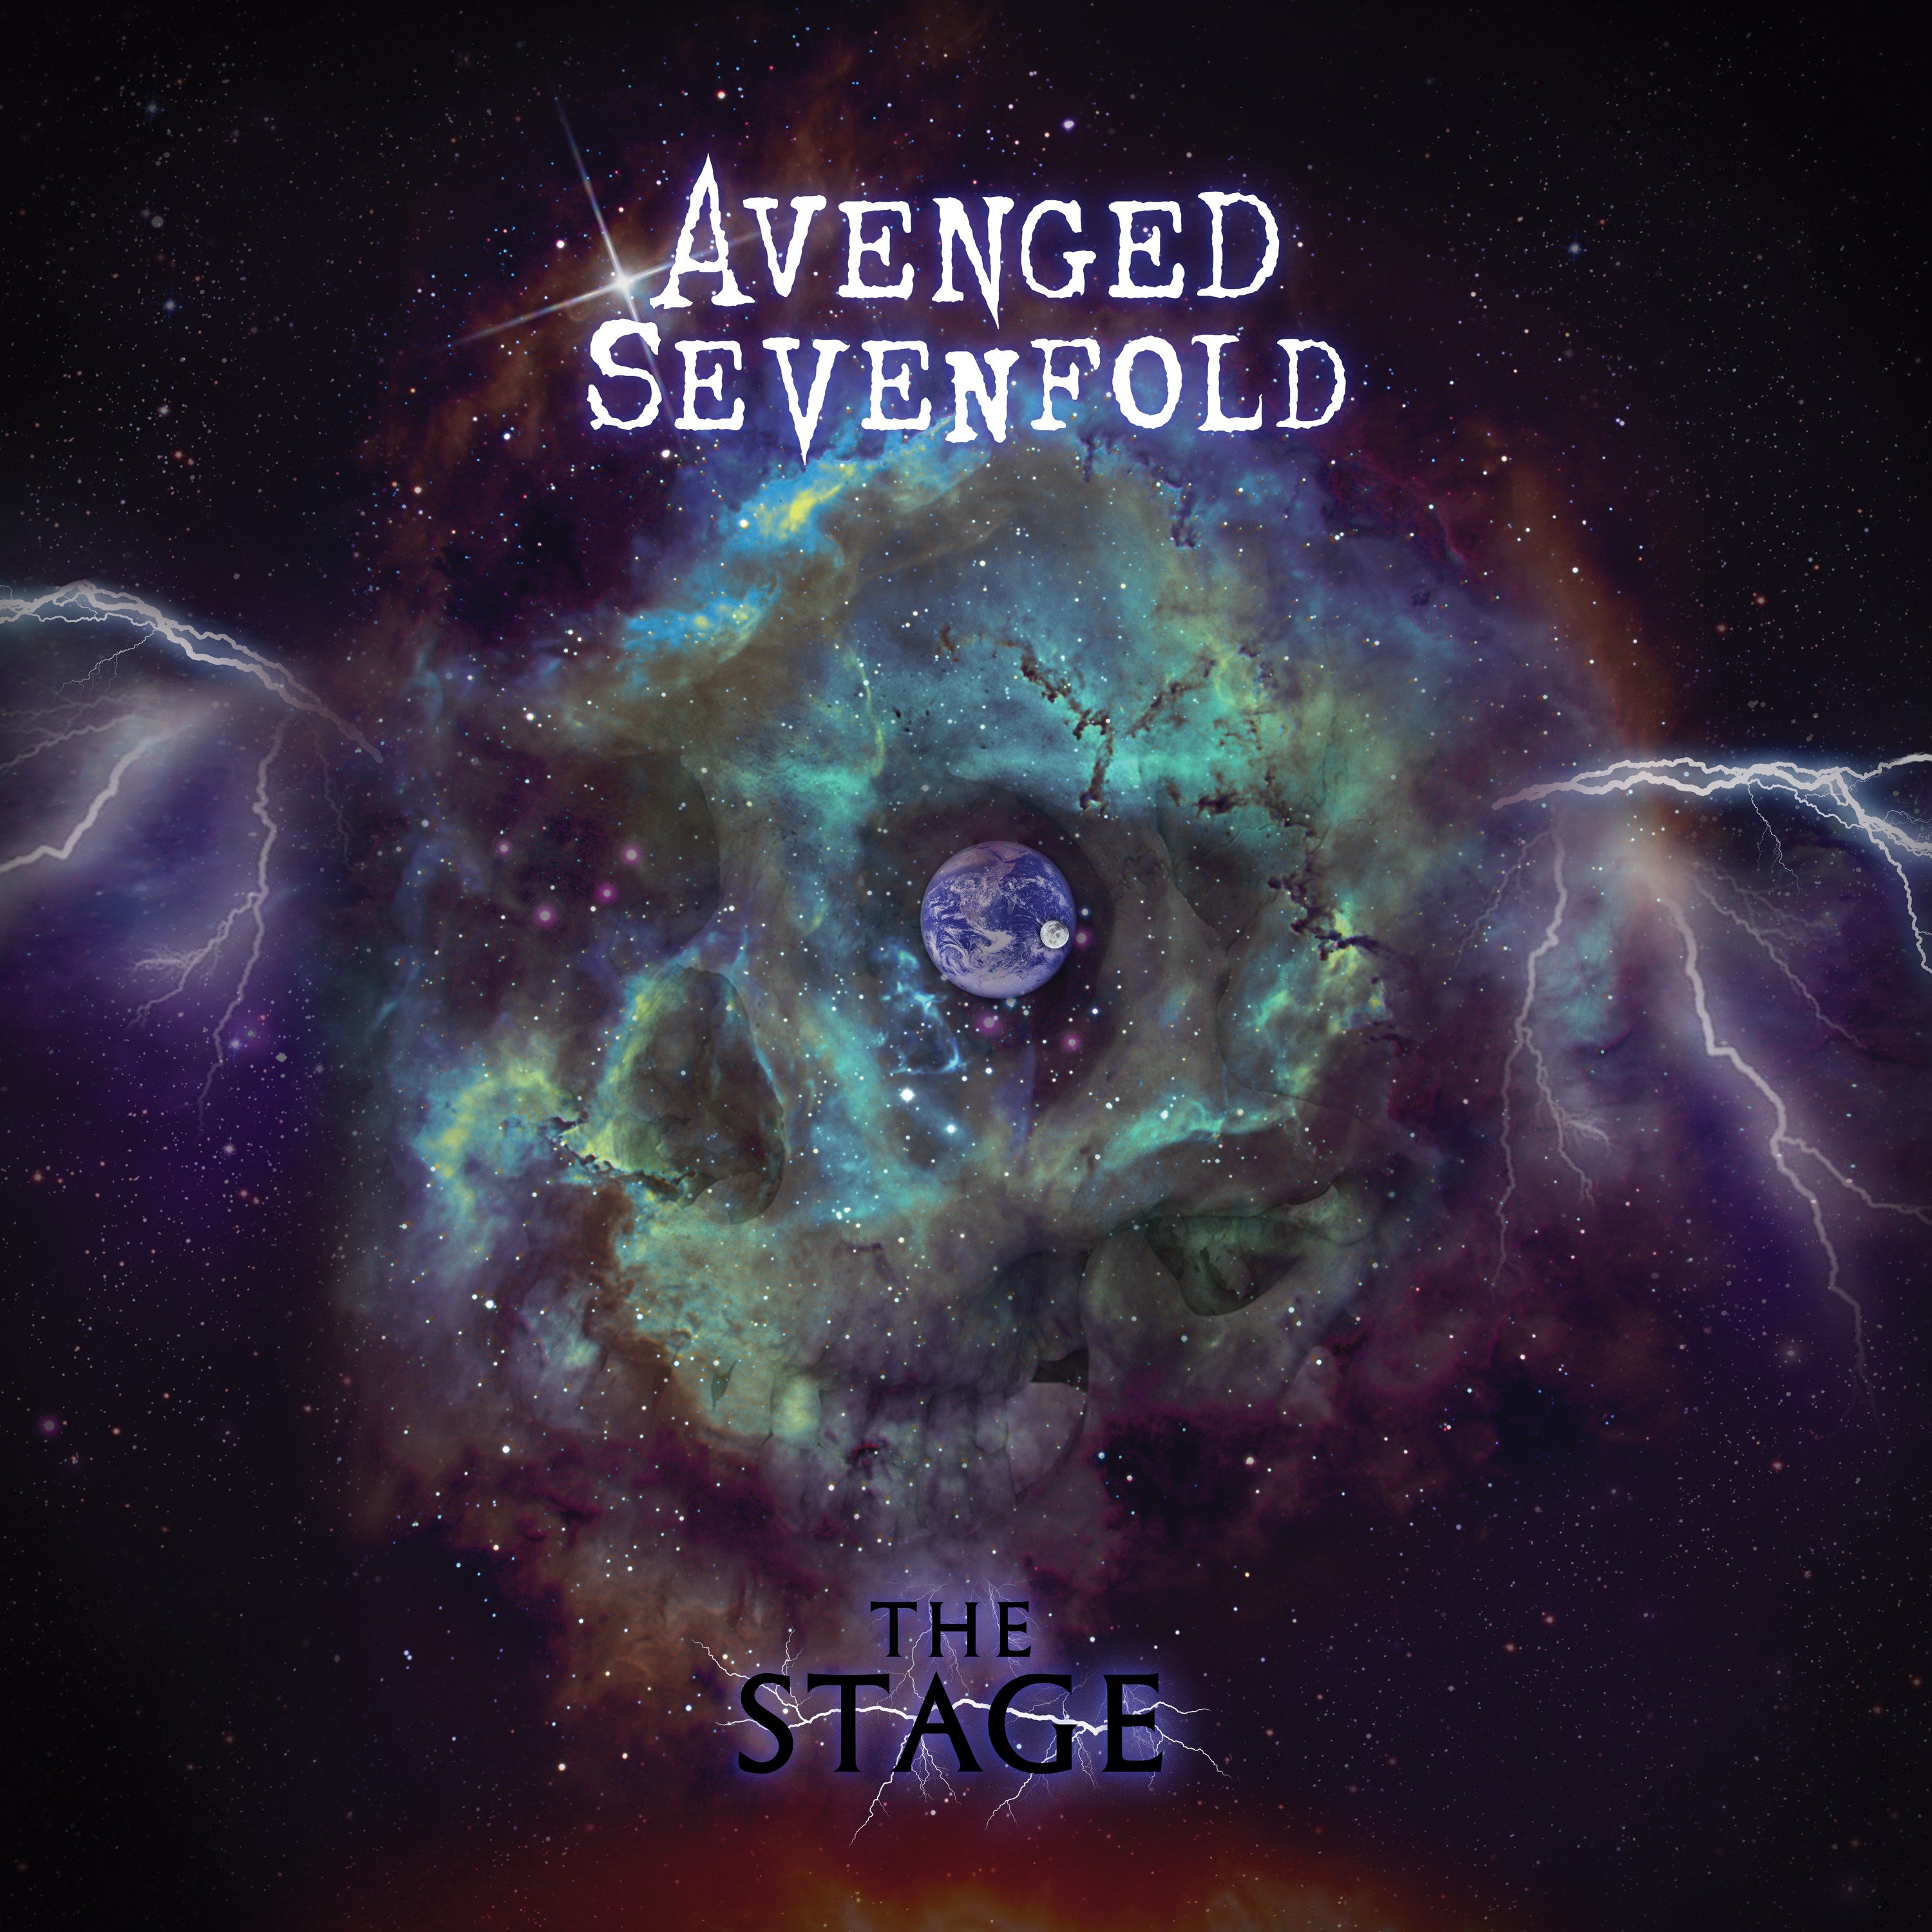 Avenged Sevenfold, The Stage, A7X, Earth Wallpaper